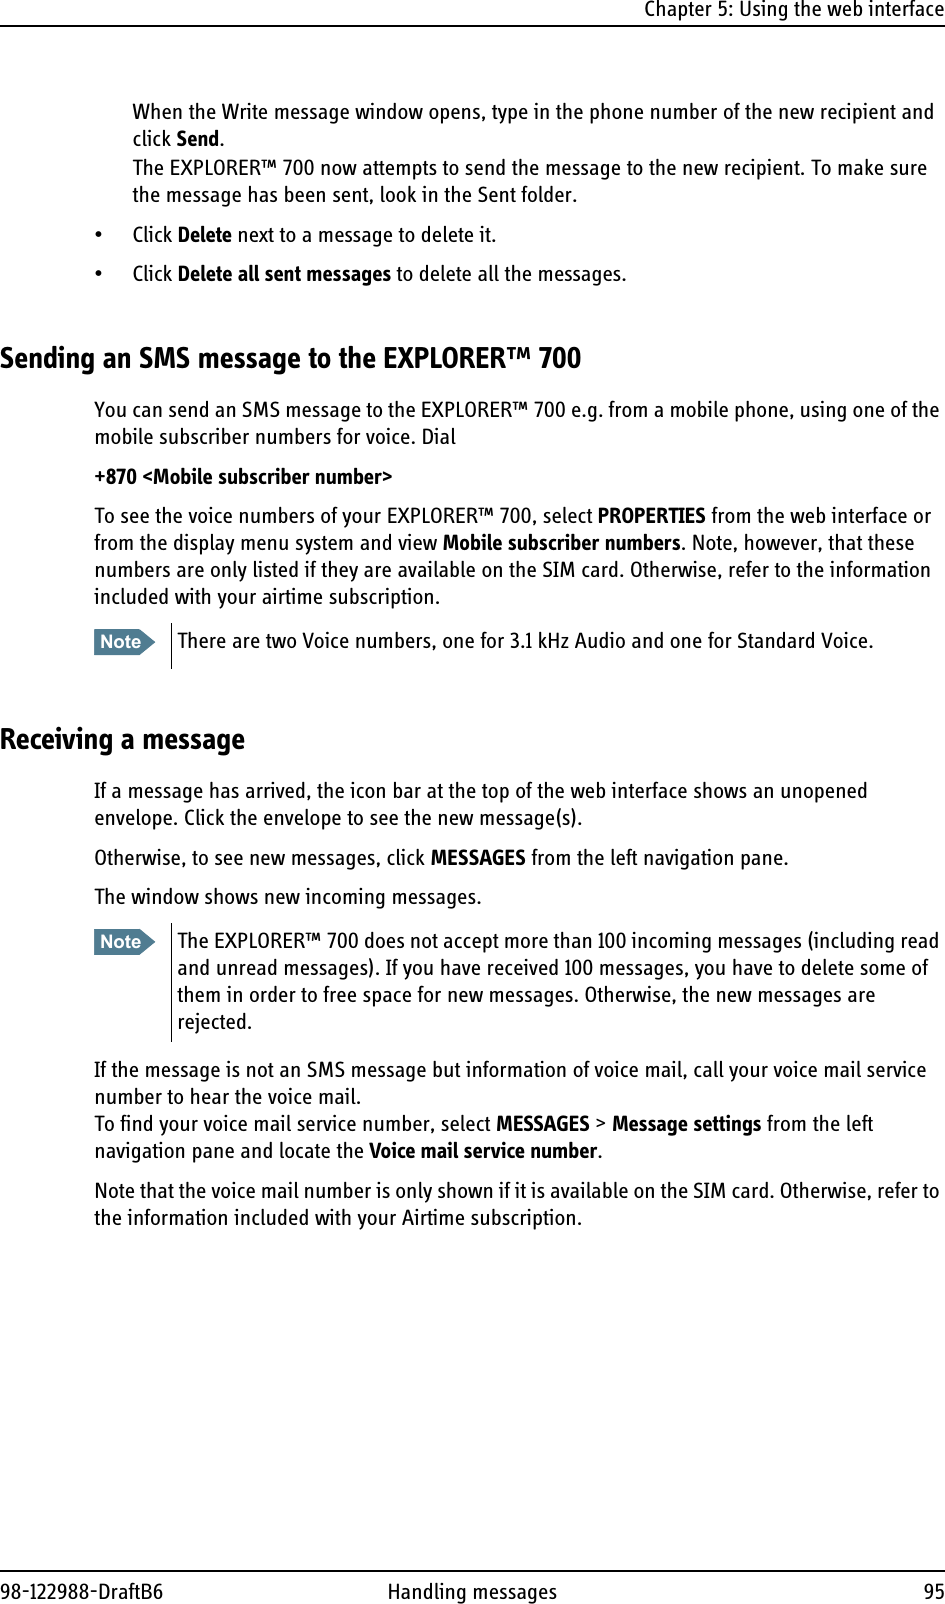 Chapter 5: Using the web interface98-122988-DraftB6 Handling messages 95When the Write message window opens, type in the phone number of the new recipient and click Send.The EXPLORER™ 700 now attempts to send the message to the new recipient. To make sure the message has been sent, look in the Sent folder.• Click Delete next to a message to delete it.• Click Delete all sent messages to delete all the messages.Sending an SMS message to the EXPLORER™ 700You can send an SMS message to the EXPLORER™ 700 e.g. from a mobile phone, using one of the mobile subscriber numbers for voice. Dial+870 &lt;Mobile subscriber number&gt;To see the voice numbers of your EXPLORER™ 700, select PROPERTIES from the web interface or from the display menu system and view Mobile subscriber numbers. Note, however, that these numbers are only listed if they are available on the SIM card. Otherwise, refer to the information included with your airtime subscription.Receiving a messageIf a message has arrived, the icon bar at the top of the web interface shows an unopened envelope. Click the envelope to see the new message(s).Otherwise, to see new messages, click MESSAGES from the left navigation pane. The window shows new incoming messages. If the message is not an SMS message but information of voice mail, call your voice mail service number to hear the voice mail.To find your voice mail service number, select MESSAGES &gt; Message settings from the left navigation pane and locate the Voice mail service number. Note that the voice mail number is only shown if it is available on the SIM card. Otherwise, refer to the information included with your Airtime subscription.Note There are two Voice numbers, one for 3.1 kHz Audio and one for Standard Voice.Note The EXPLORER™ 700 does not accept more than 100 incoming messages (including read and unread messages). If you have received 100 messages, you have to delete some of them in order to free space for new messages. Otherwise, the new messages are rejected.